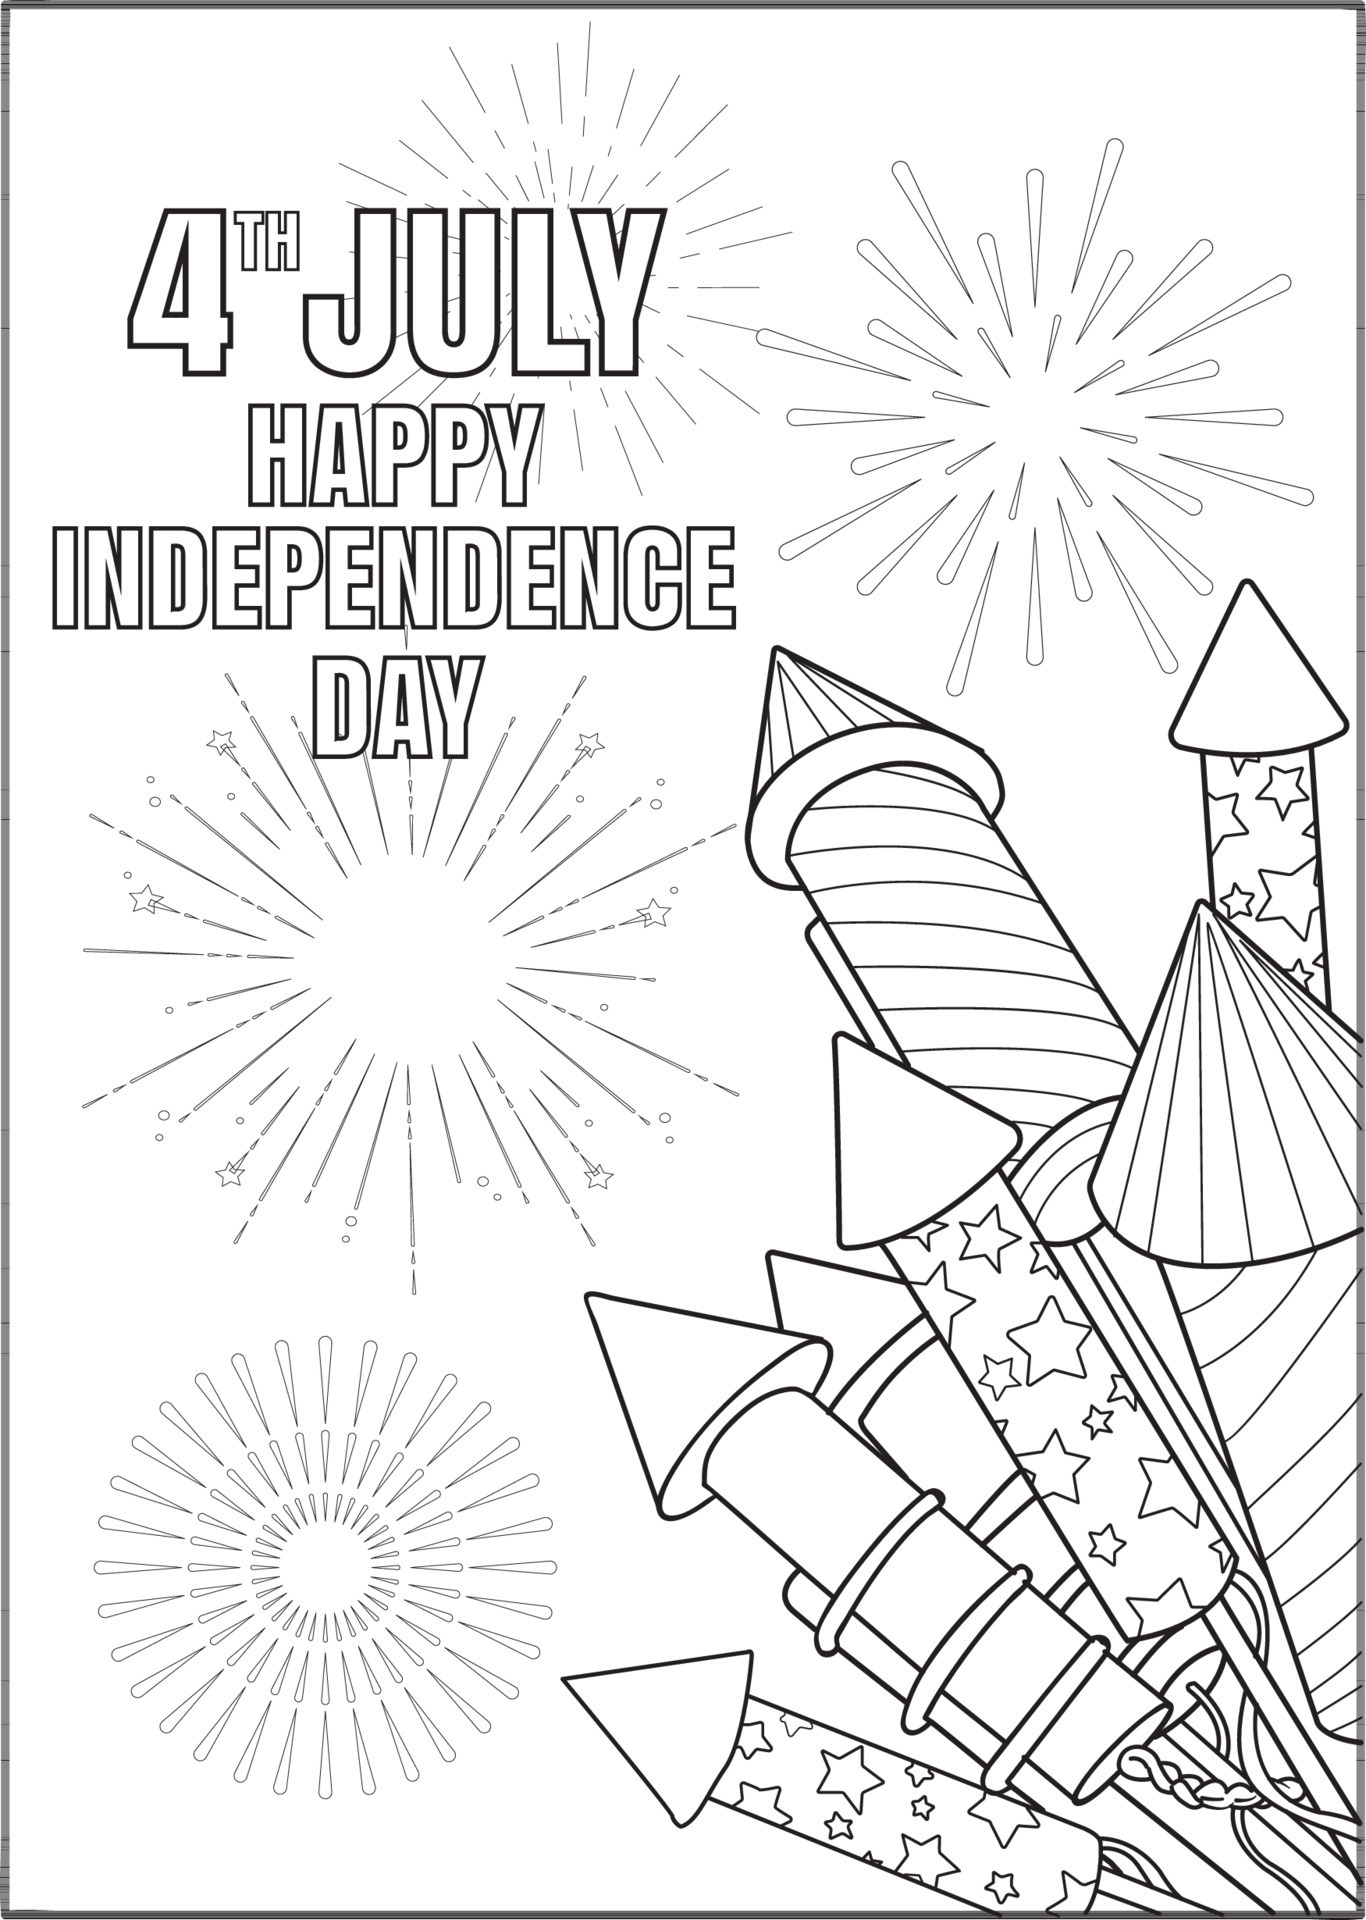 Celebrate Freedom with 4th of July: 180+ Free Coloring Pages 94